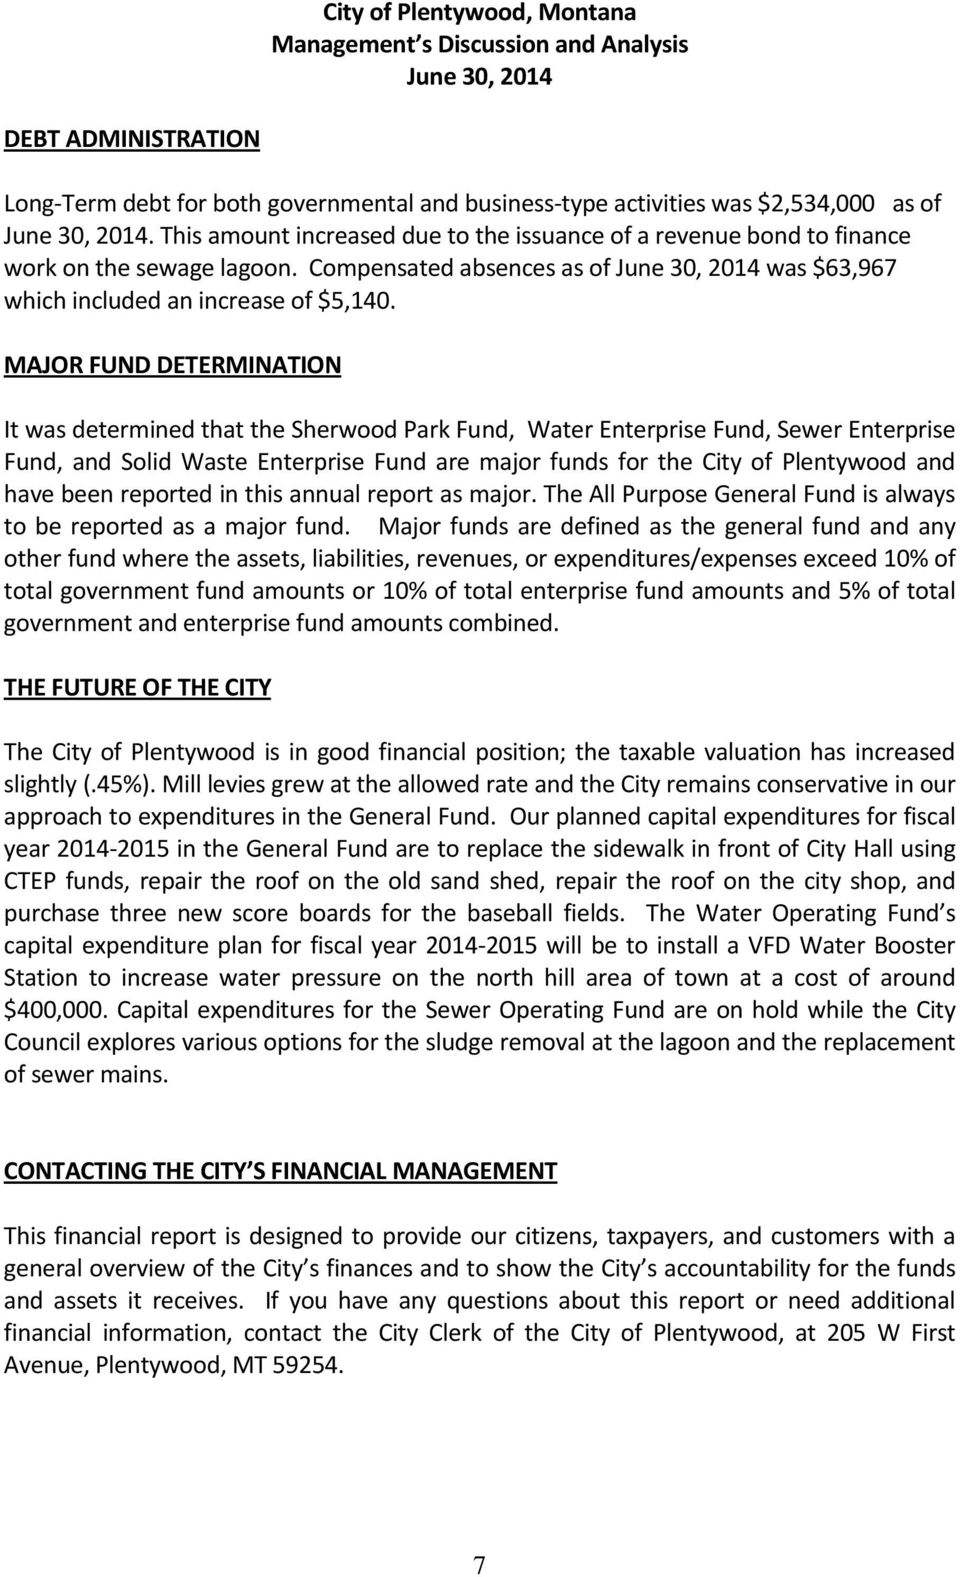 MAJOR FUND DETERMINATION It was determined that the Sherwood Park Fund, Water Enterprise Fund, Sewer Enterprise Fund, and Solid Waste Enterprise Fund are major funds for the City of Plentywood and